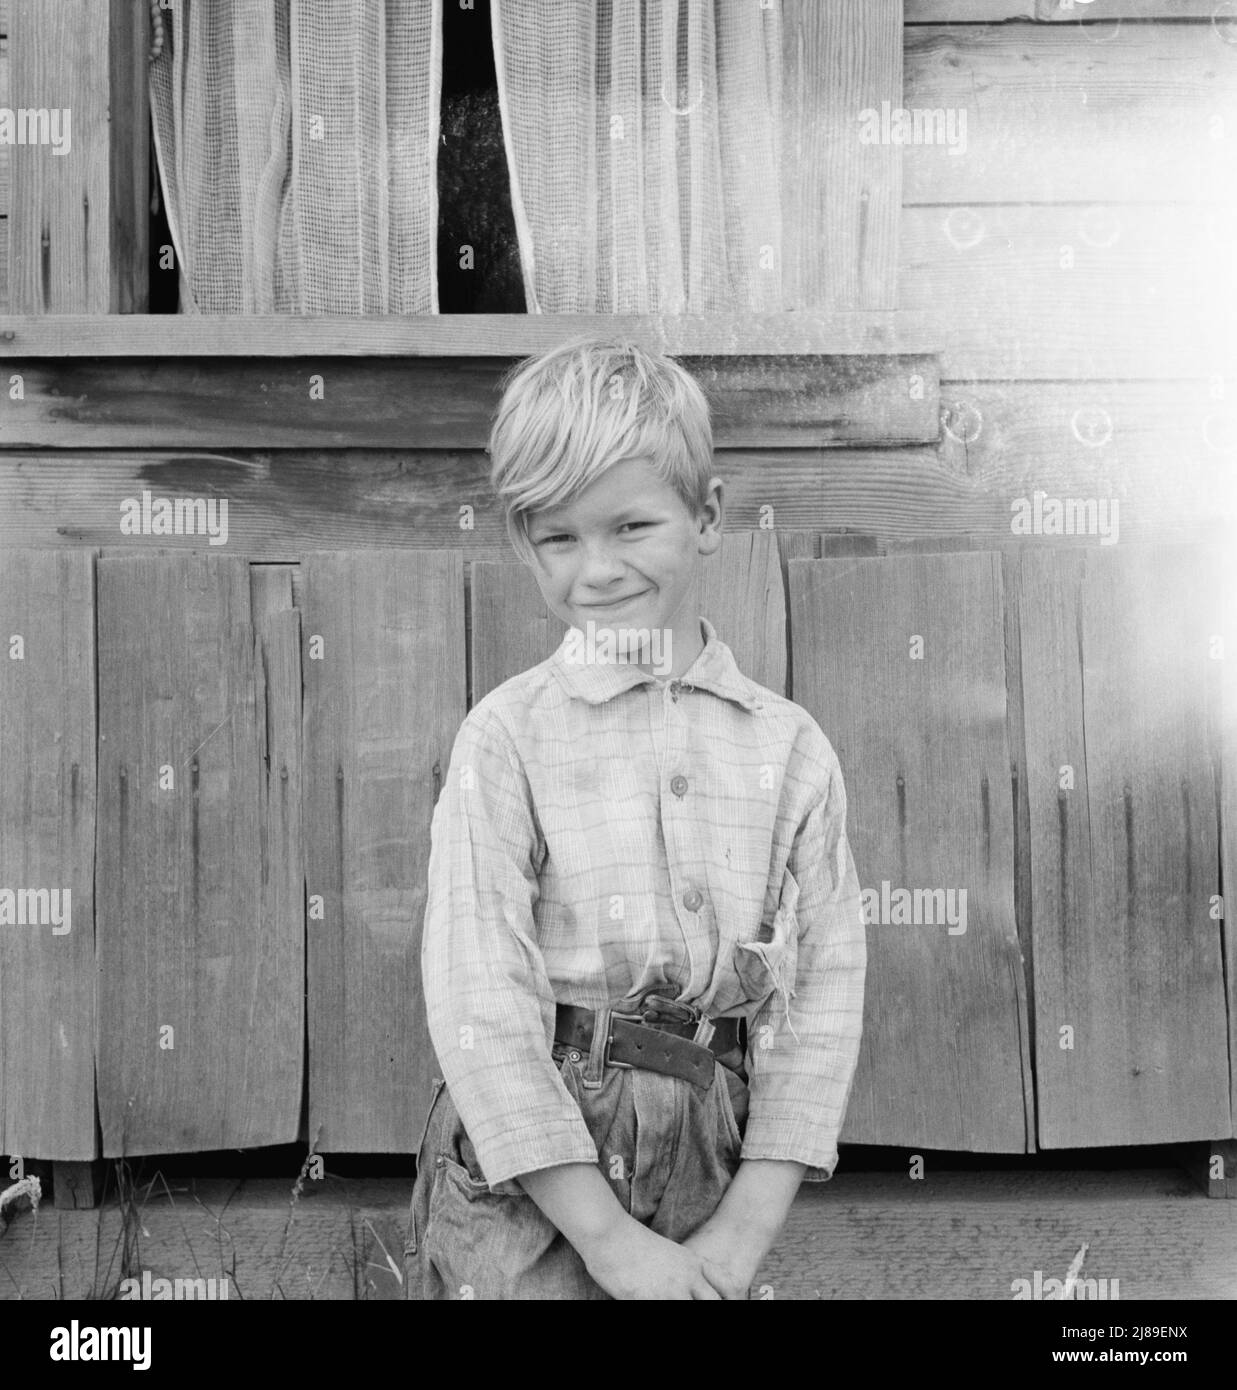 The youngest Arnold boy who also works at land clearing. Western Washington, Thurston County, Michigan Hill. See general caption number 36. Stock Photo